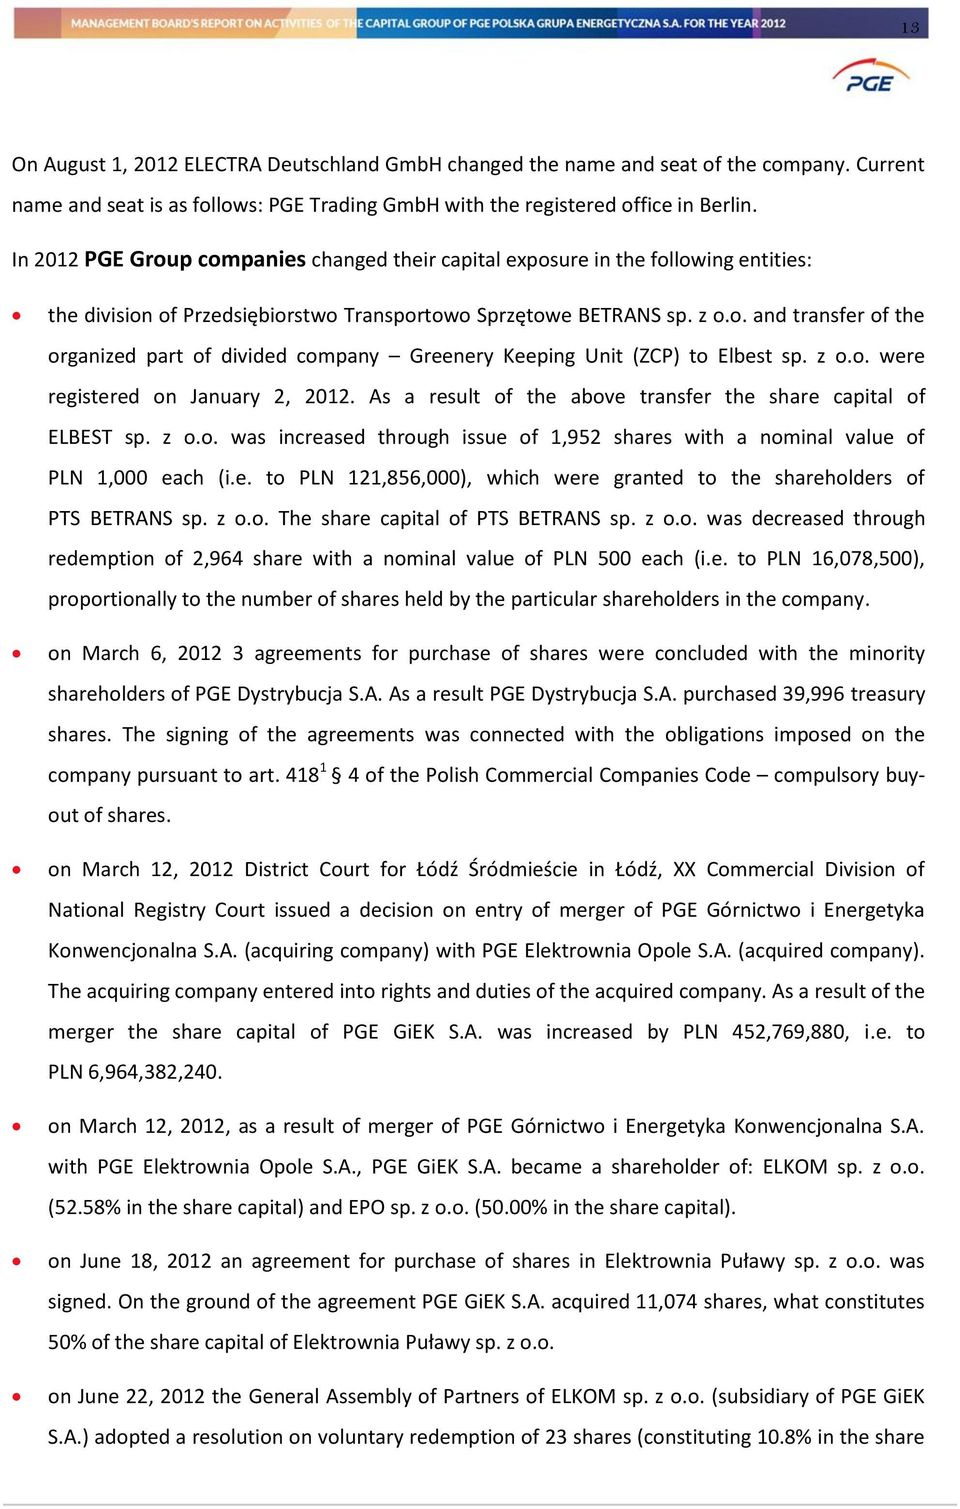 z o.o. were registered on January 2, 2012. As a result of the above transfer the share capital of ELBEST sp. z o.o. was increased through issue of 1,952 shares with a nominal value of PLN 1,000 each (i.